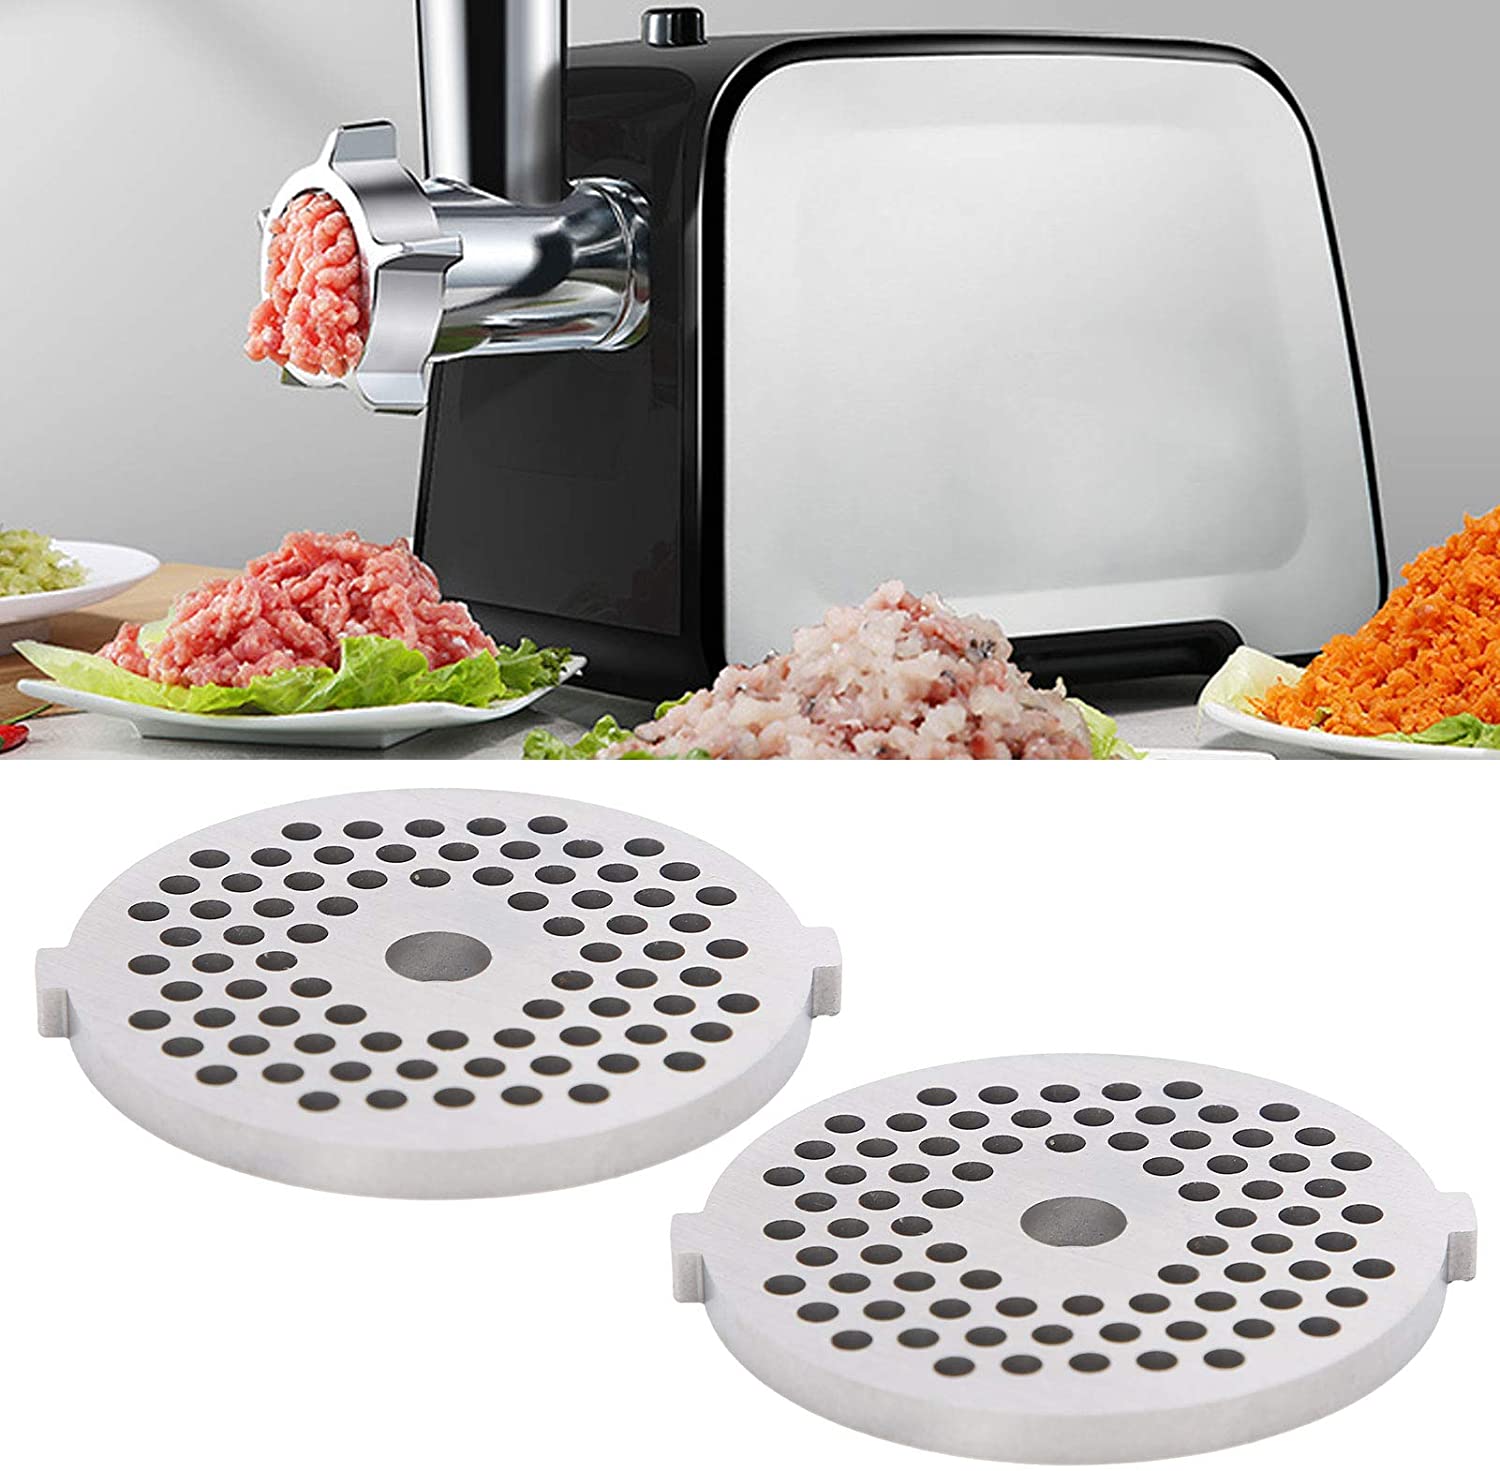 RBSD Meat Grinder Plate, Meat Chopping Disc, Concise and 2 Pieces/Set for 5# Meat Mincer Round Hole Meat Mincers (3 mm Aperture Mesh Knife)